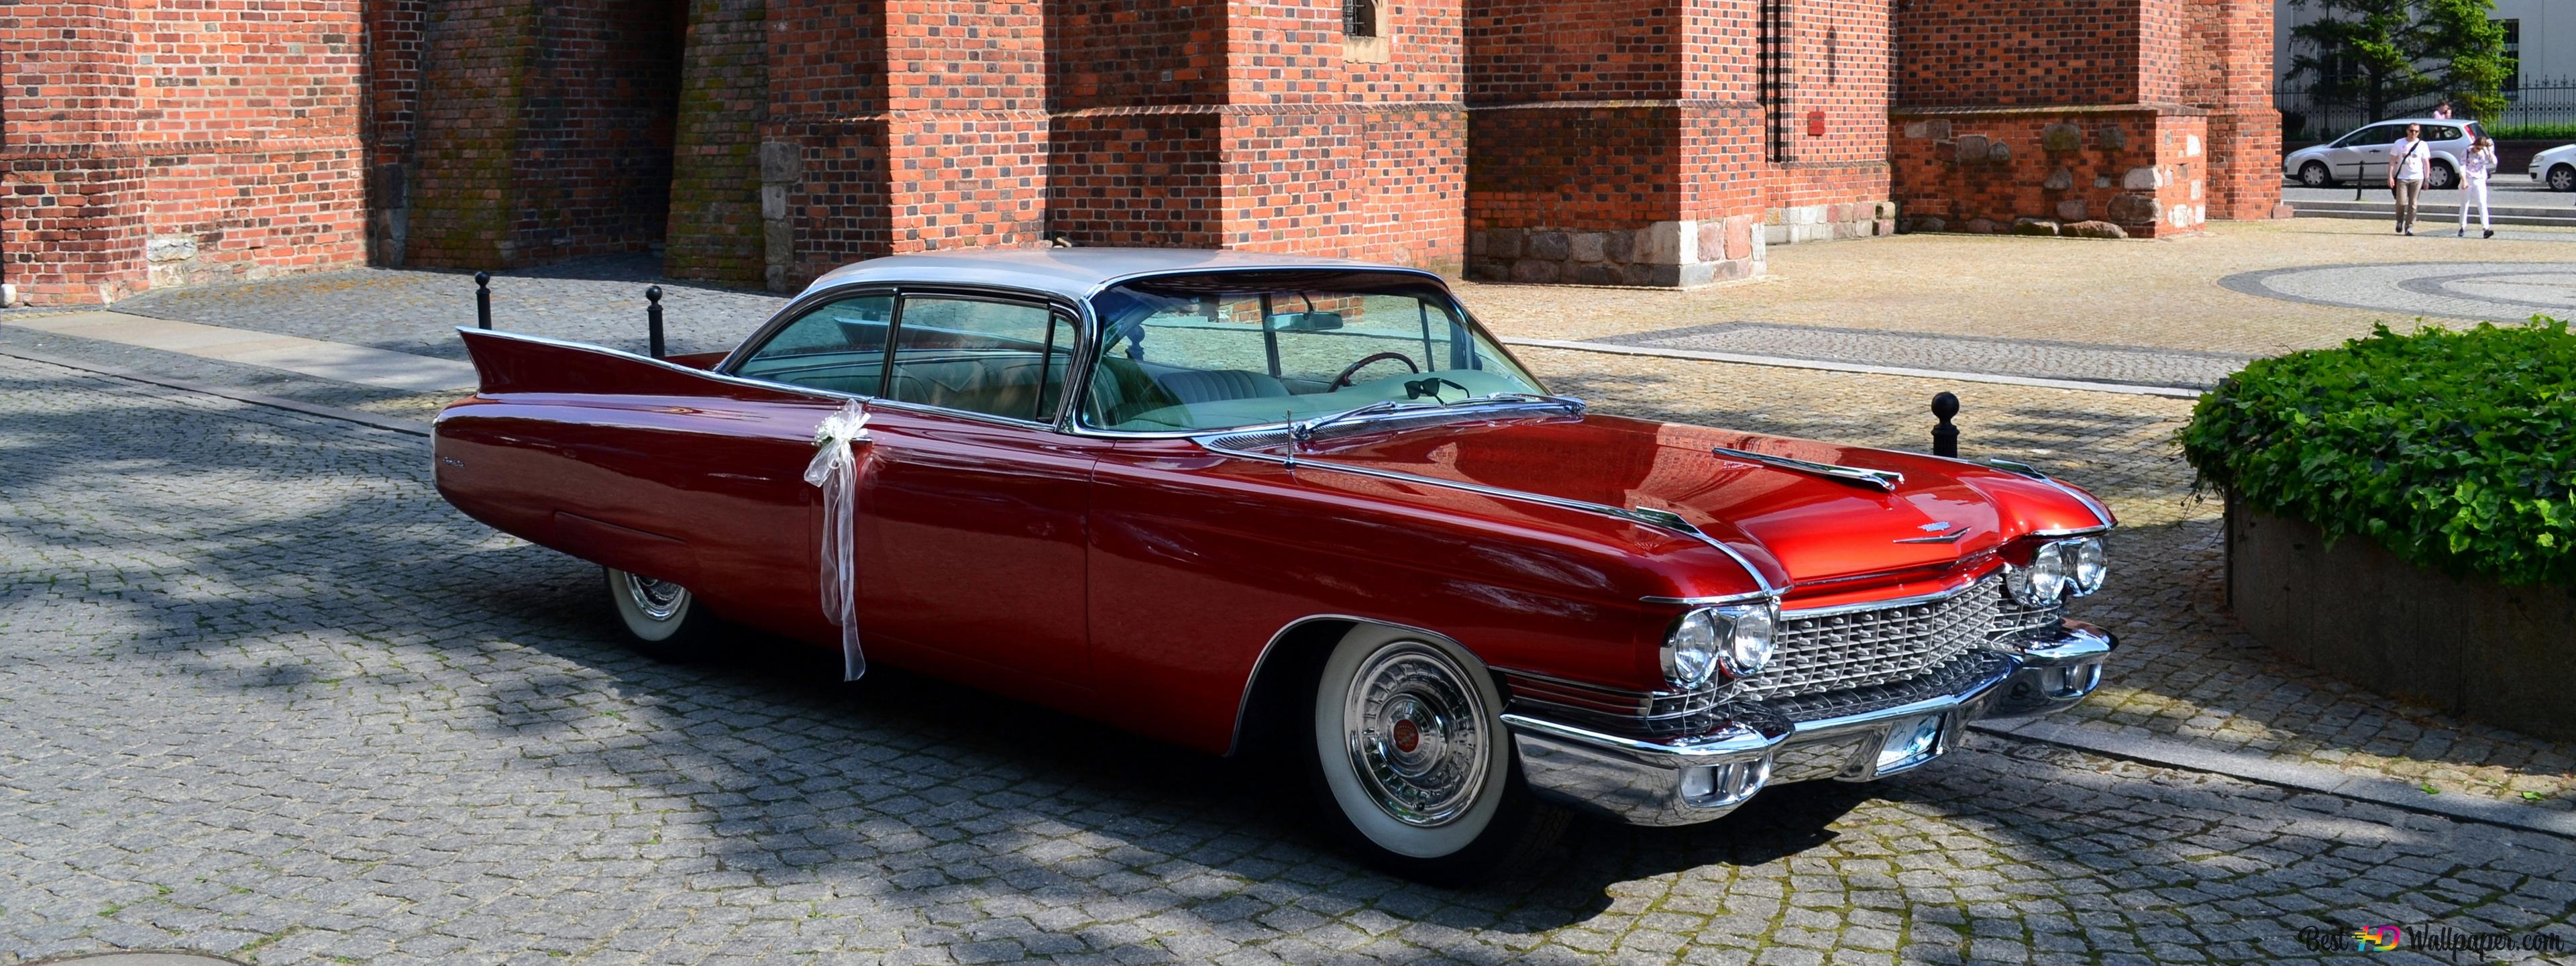 1959 Cadillac Coupe Deville Wallpapers